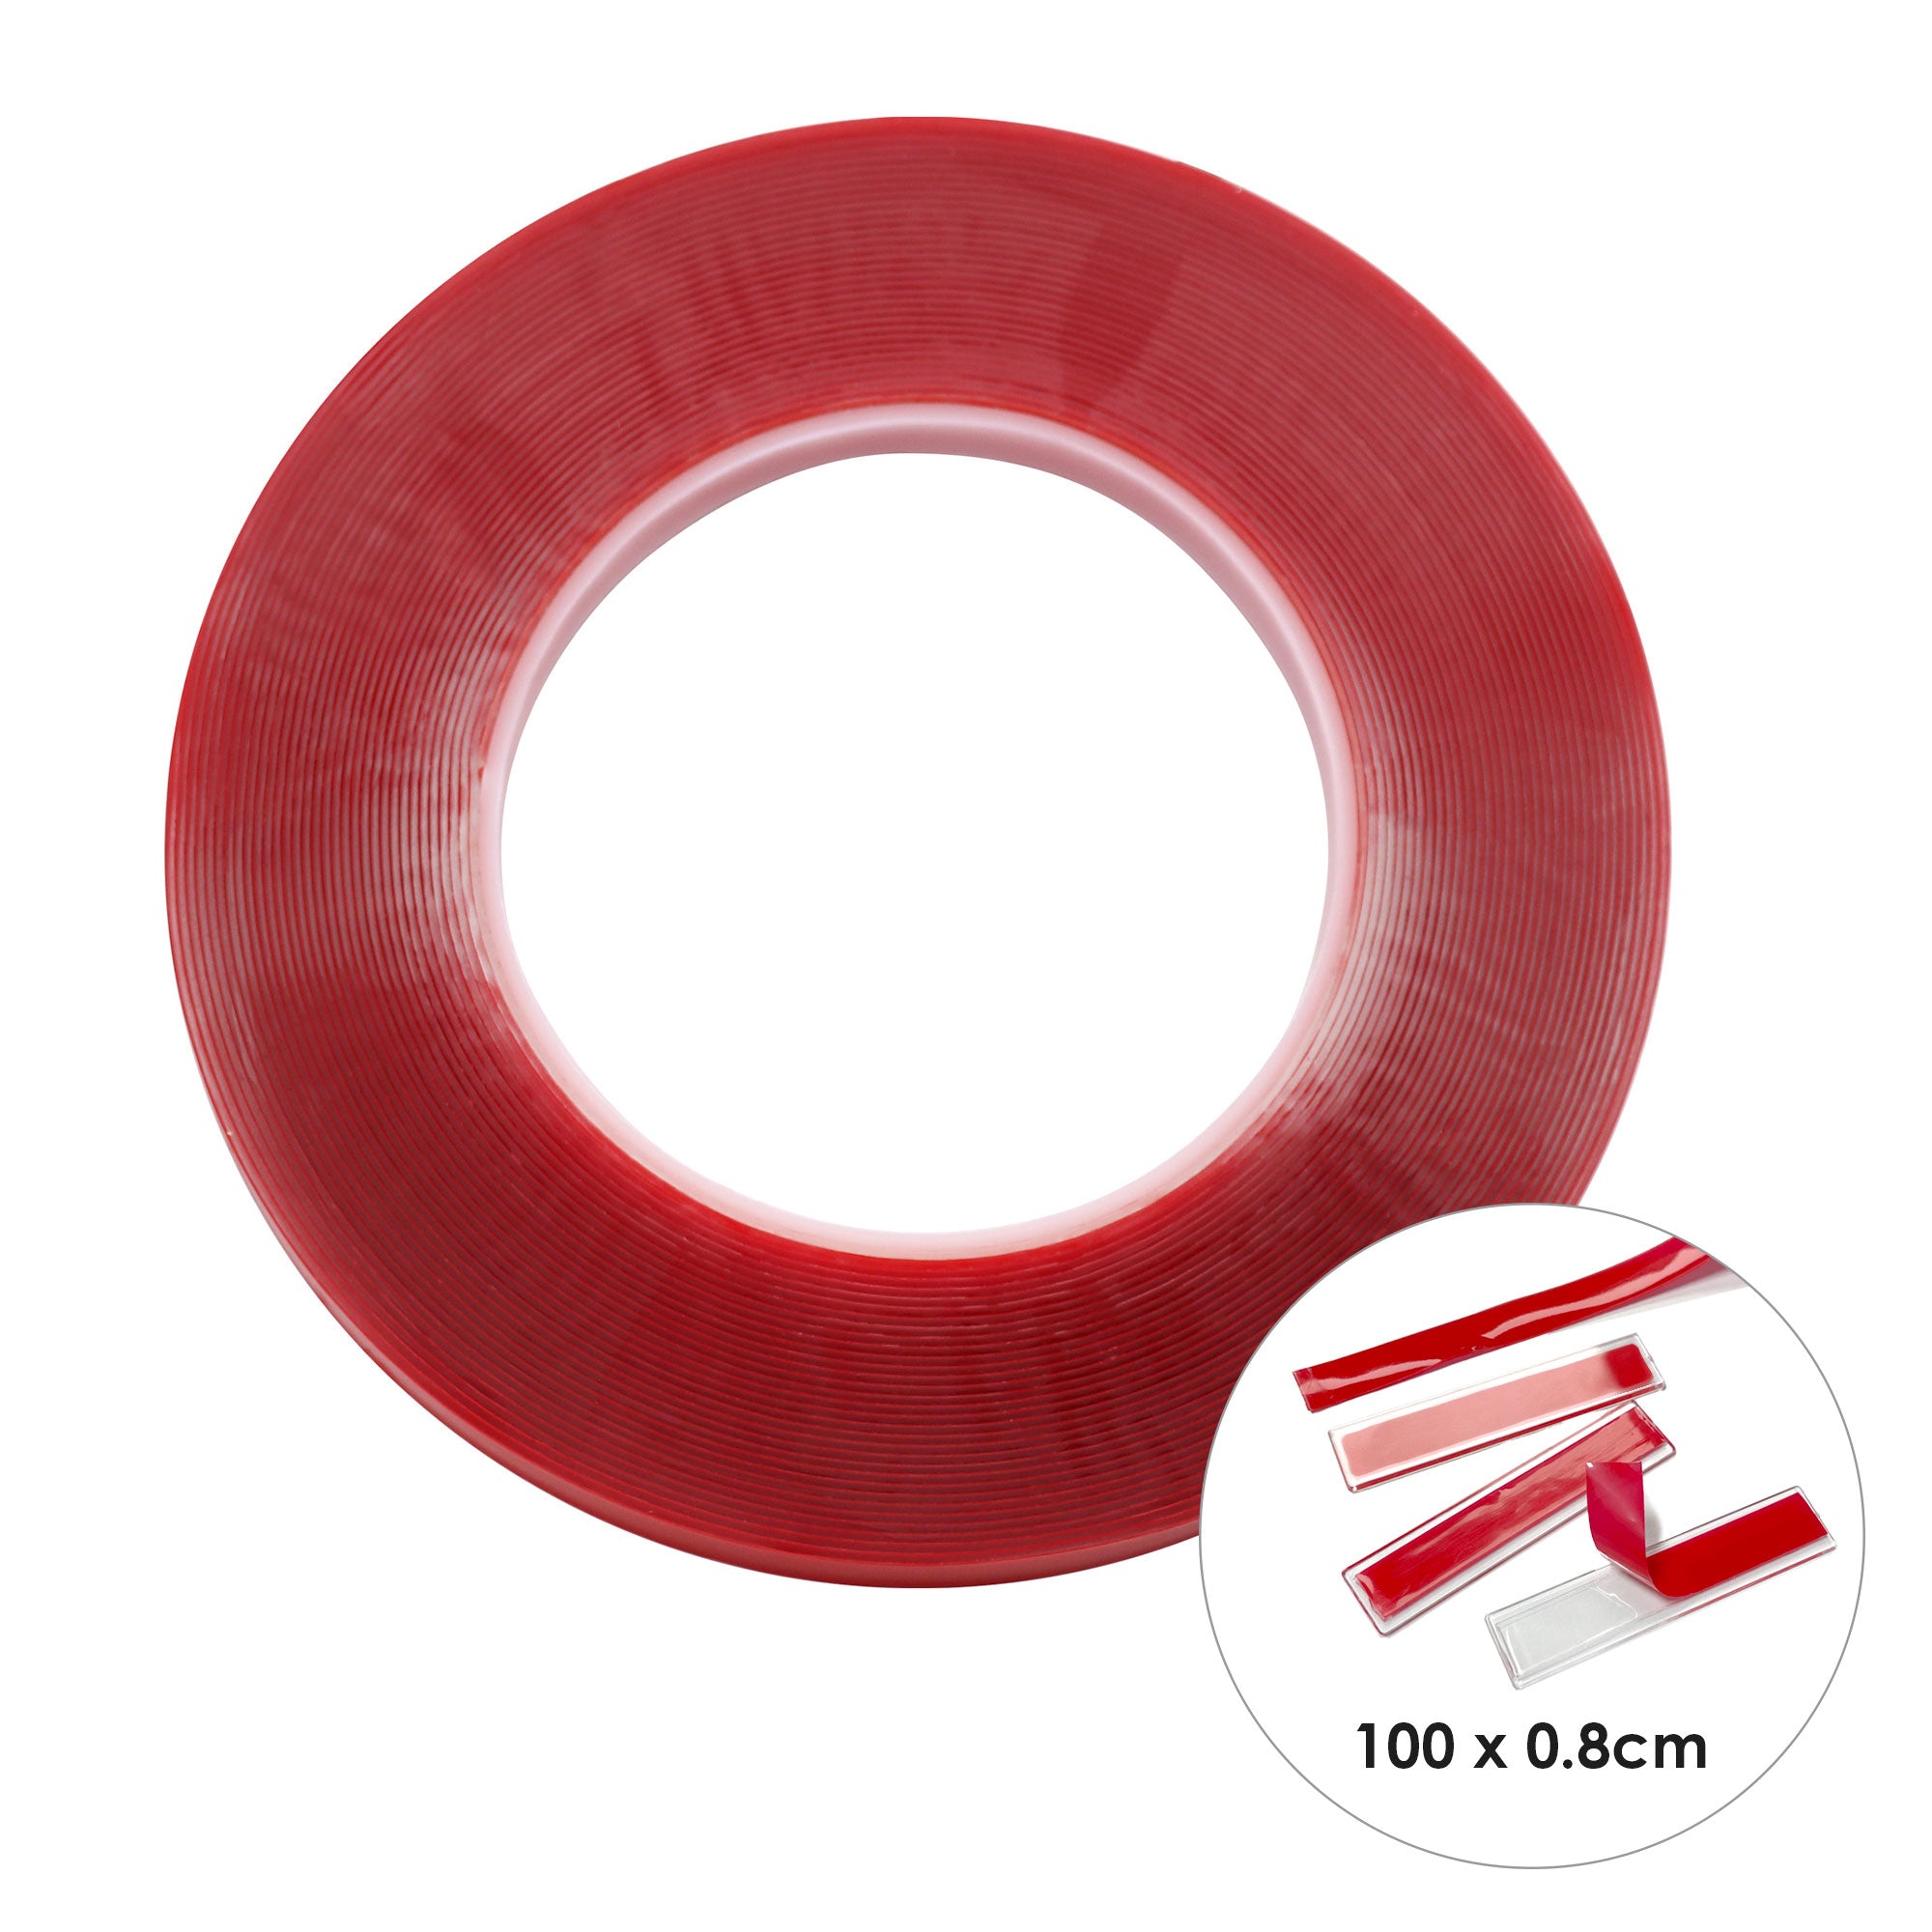 Nail Chip Tip Display Double-Sided Jelly Adhesive Tape / 1 Meter